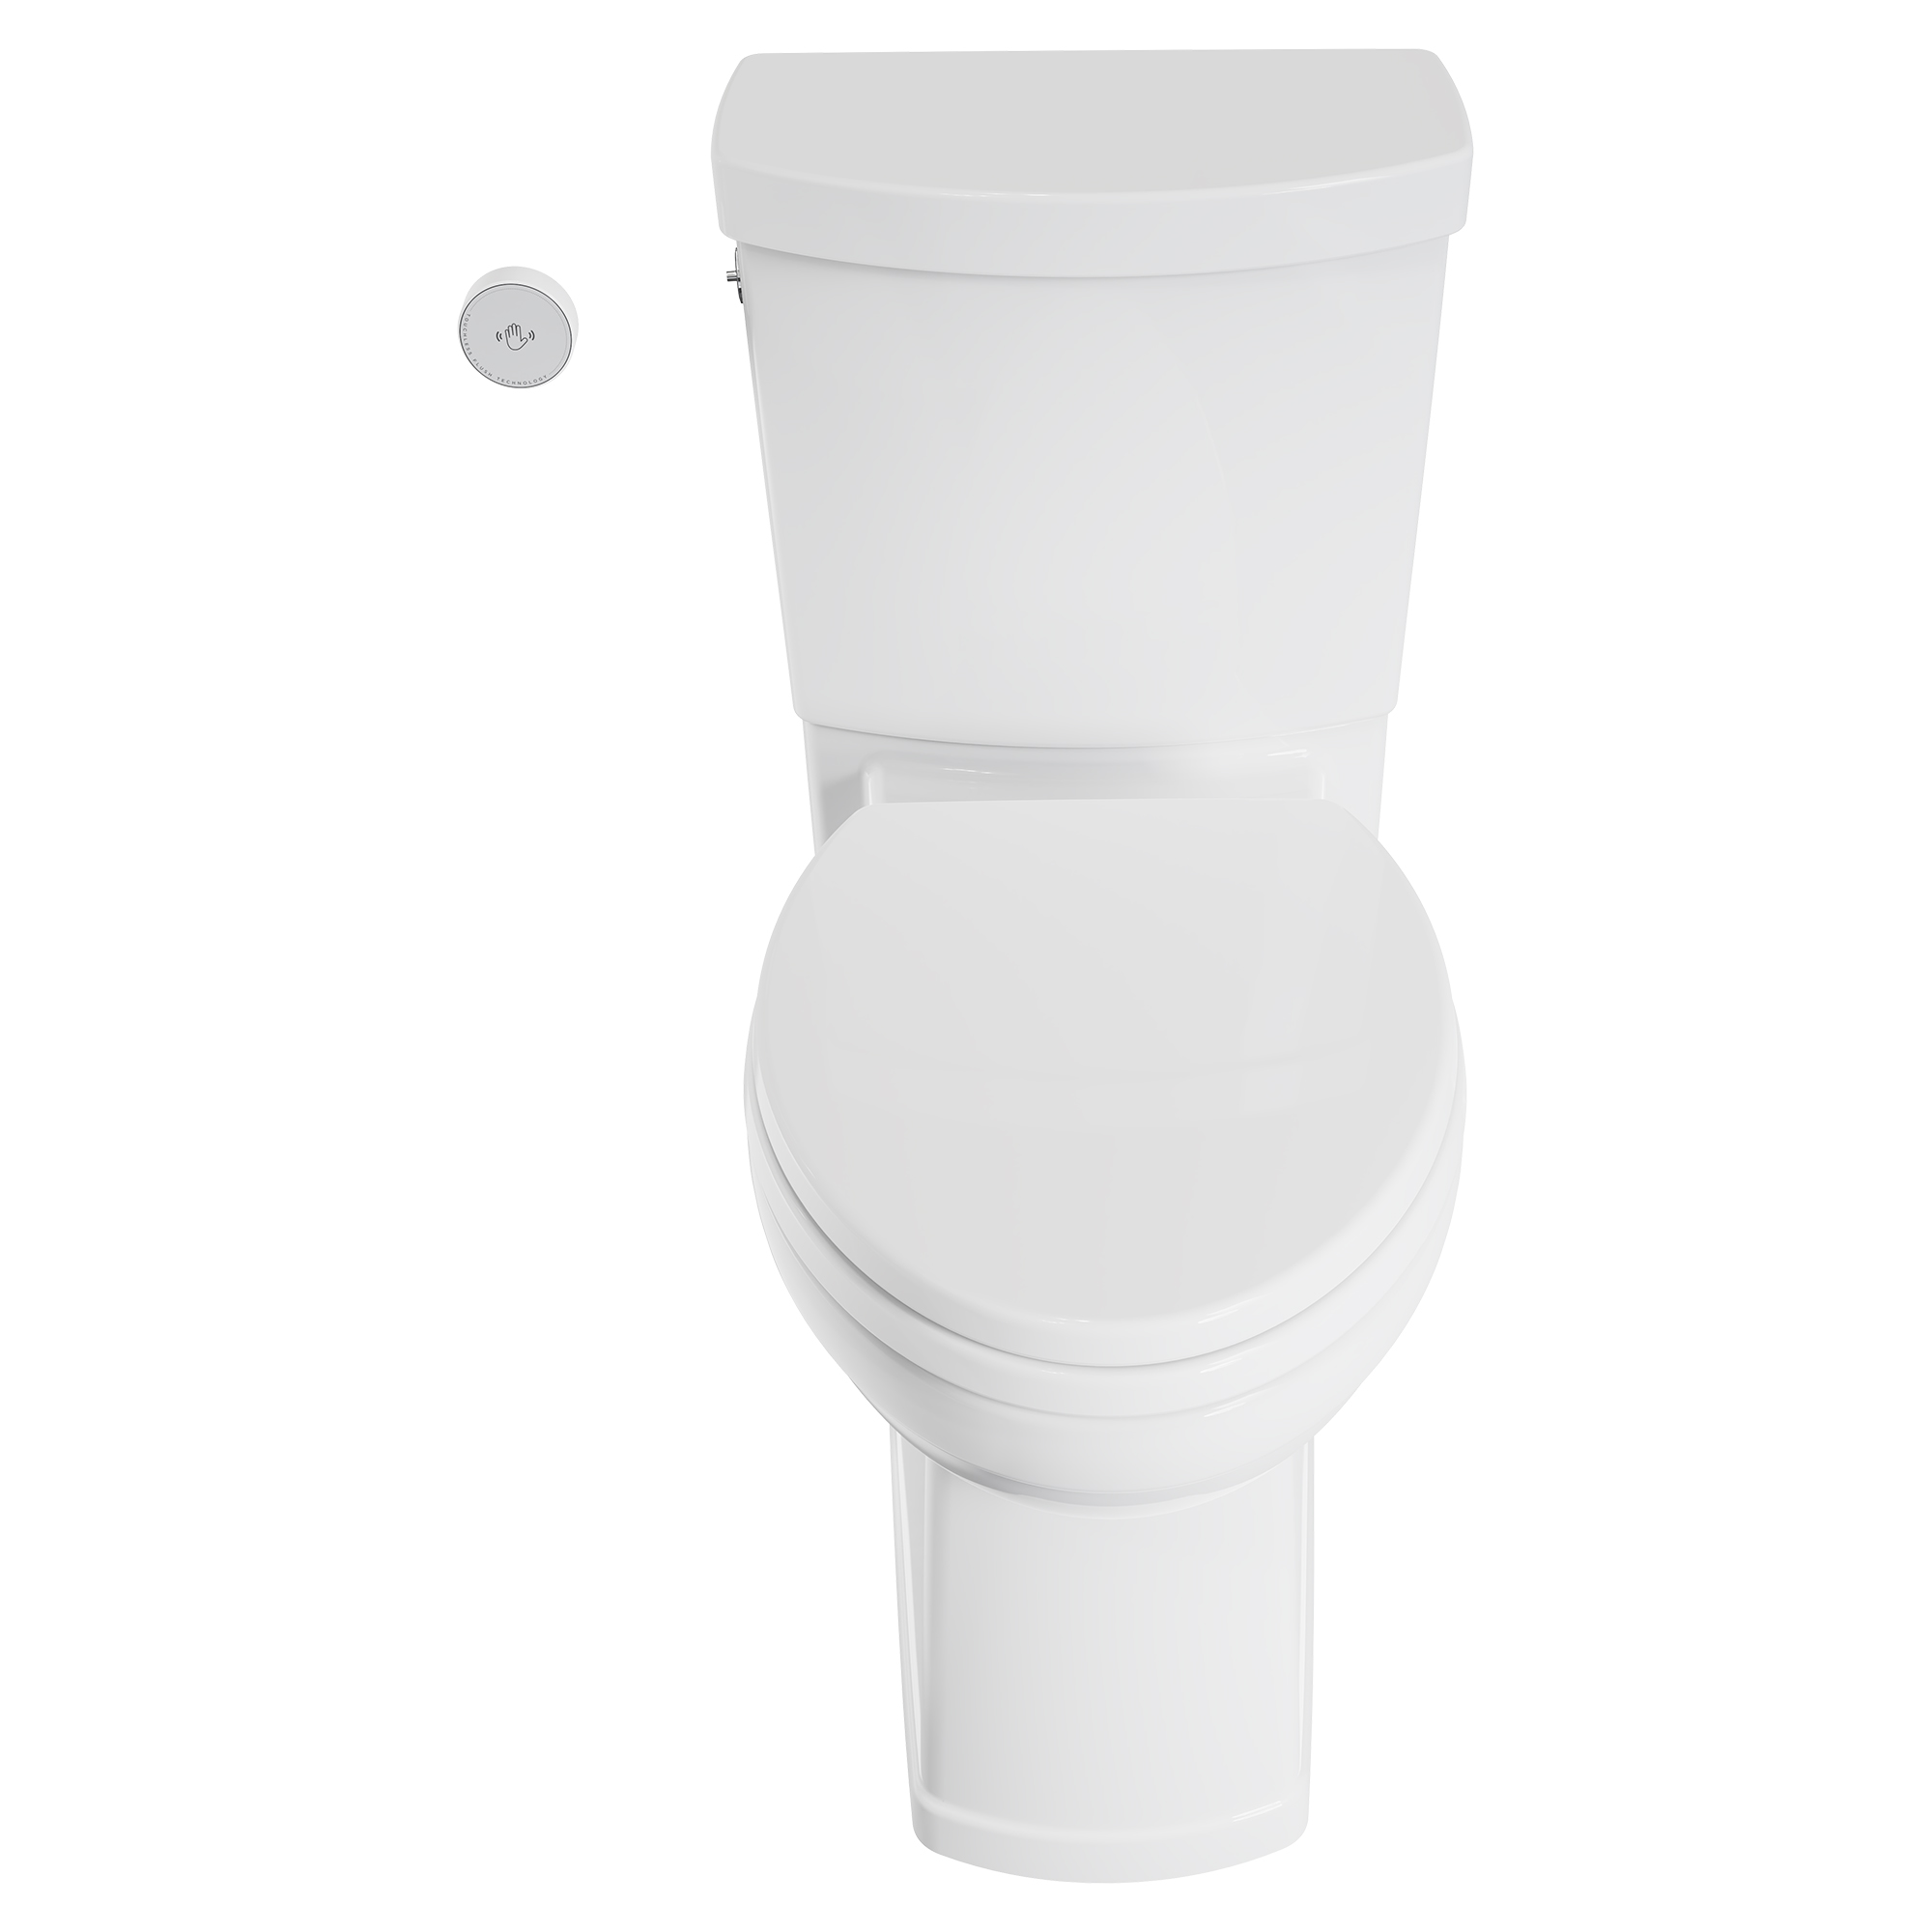 Estate® Touchless Skirted Two-Piece 1.28 gpf/4.8 Lpf Chair Height Elongated Toilet With Seat